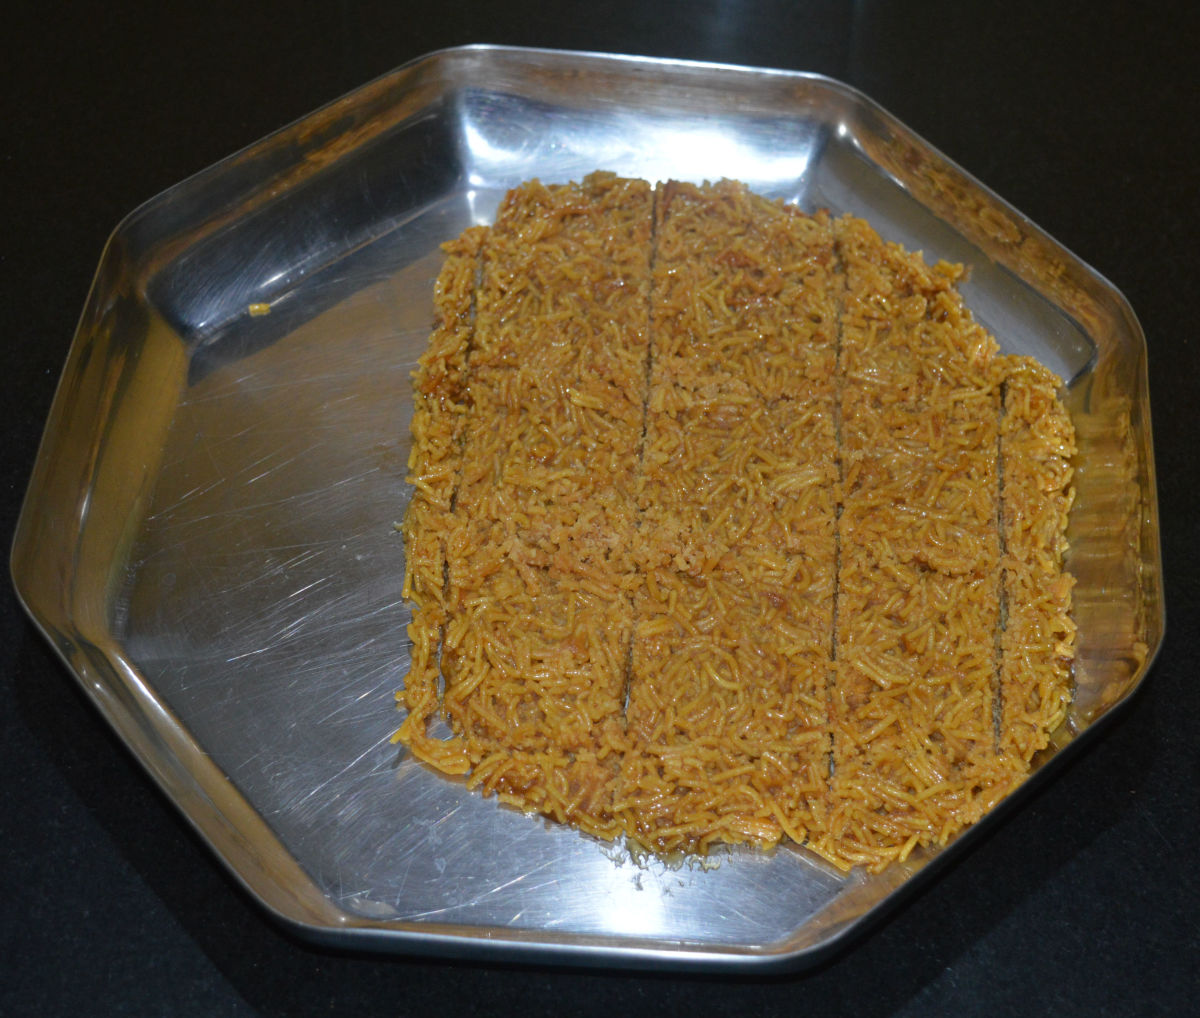 After 5 minutes, draw shallow criss-cross lines on the sev chikki, so that you can get rectangle or square pieces when you cut them on the line.